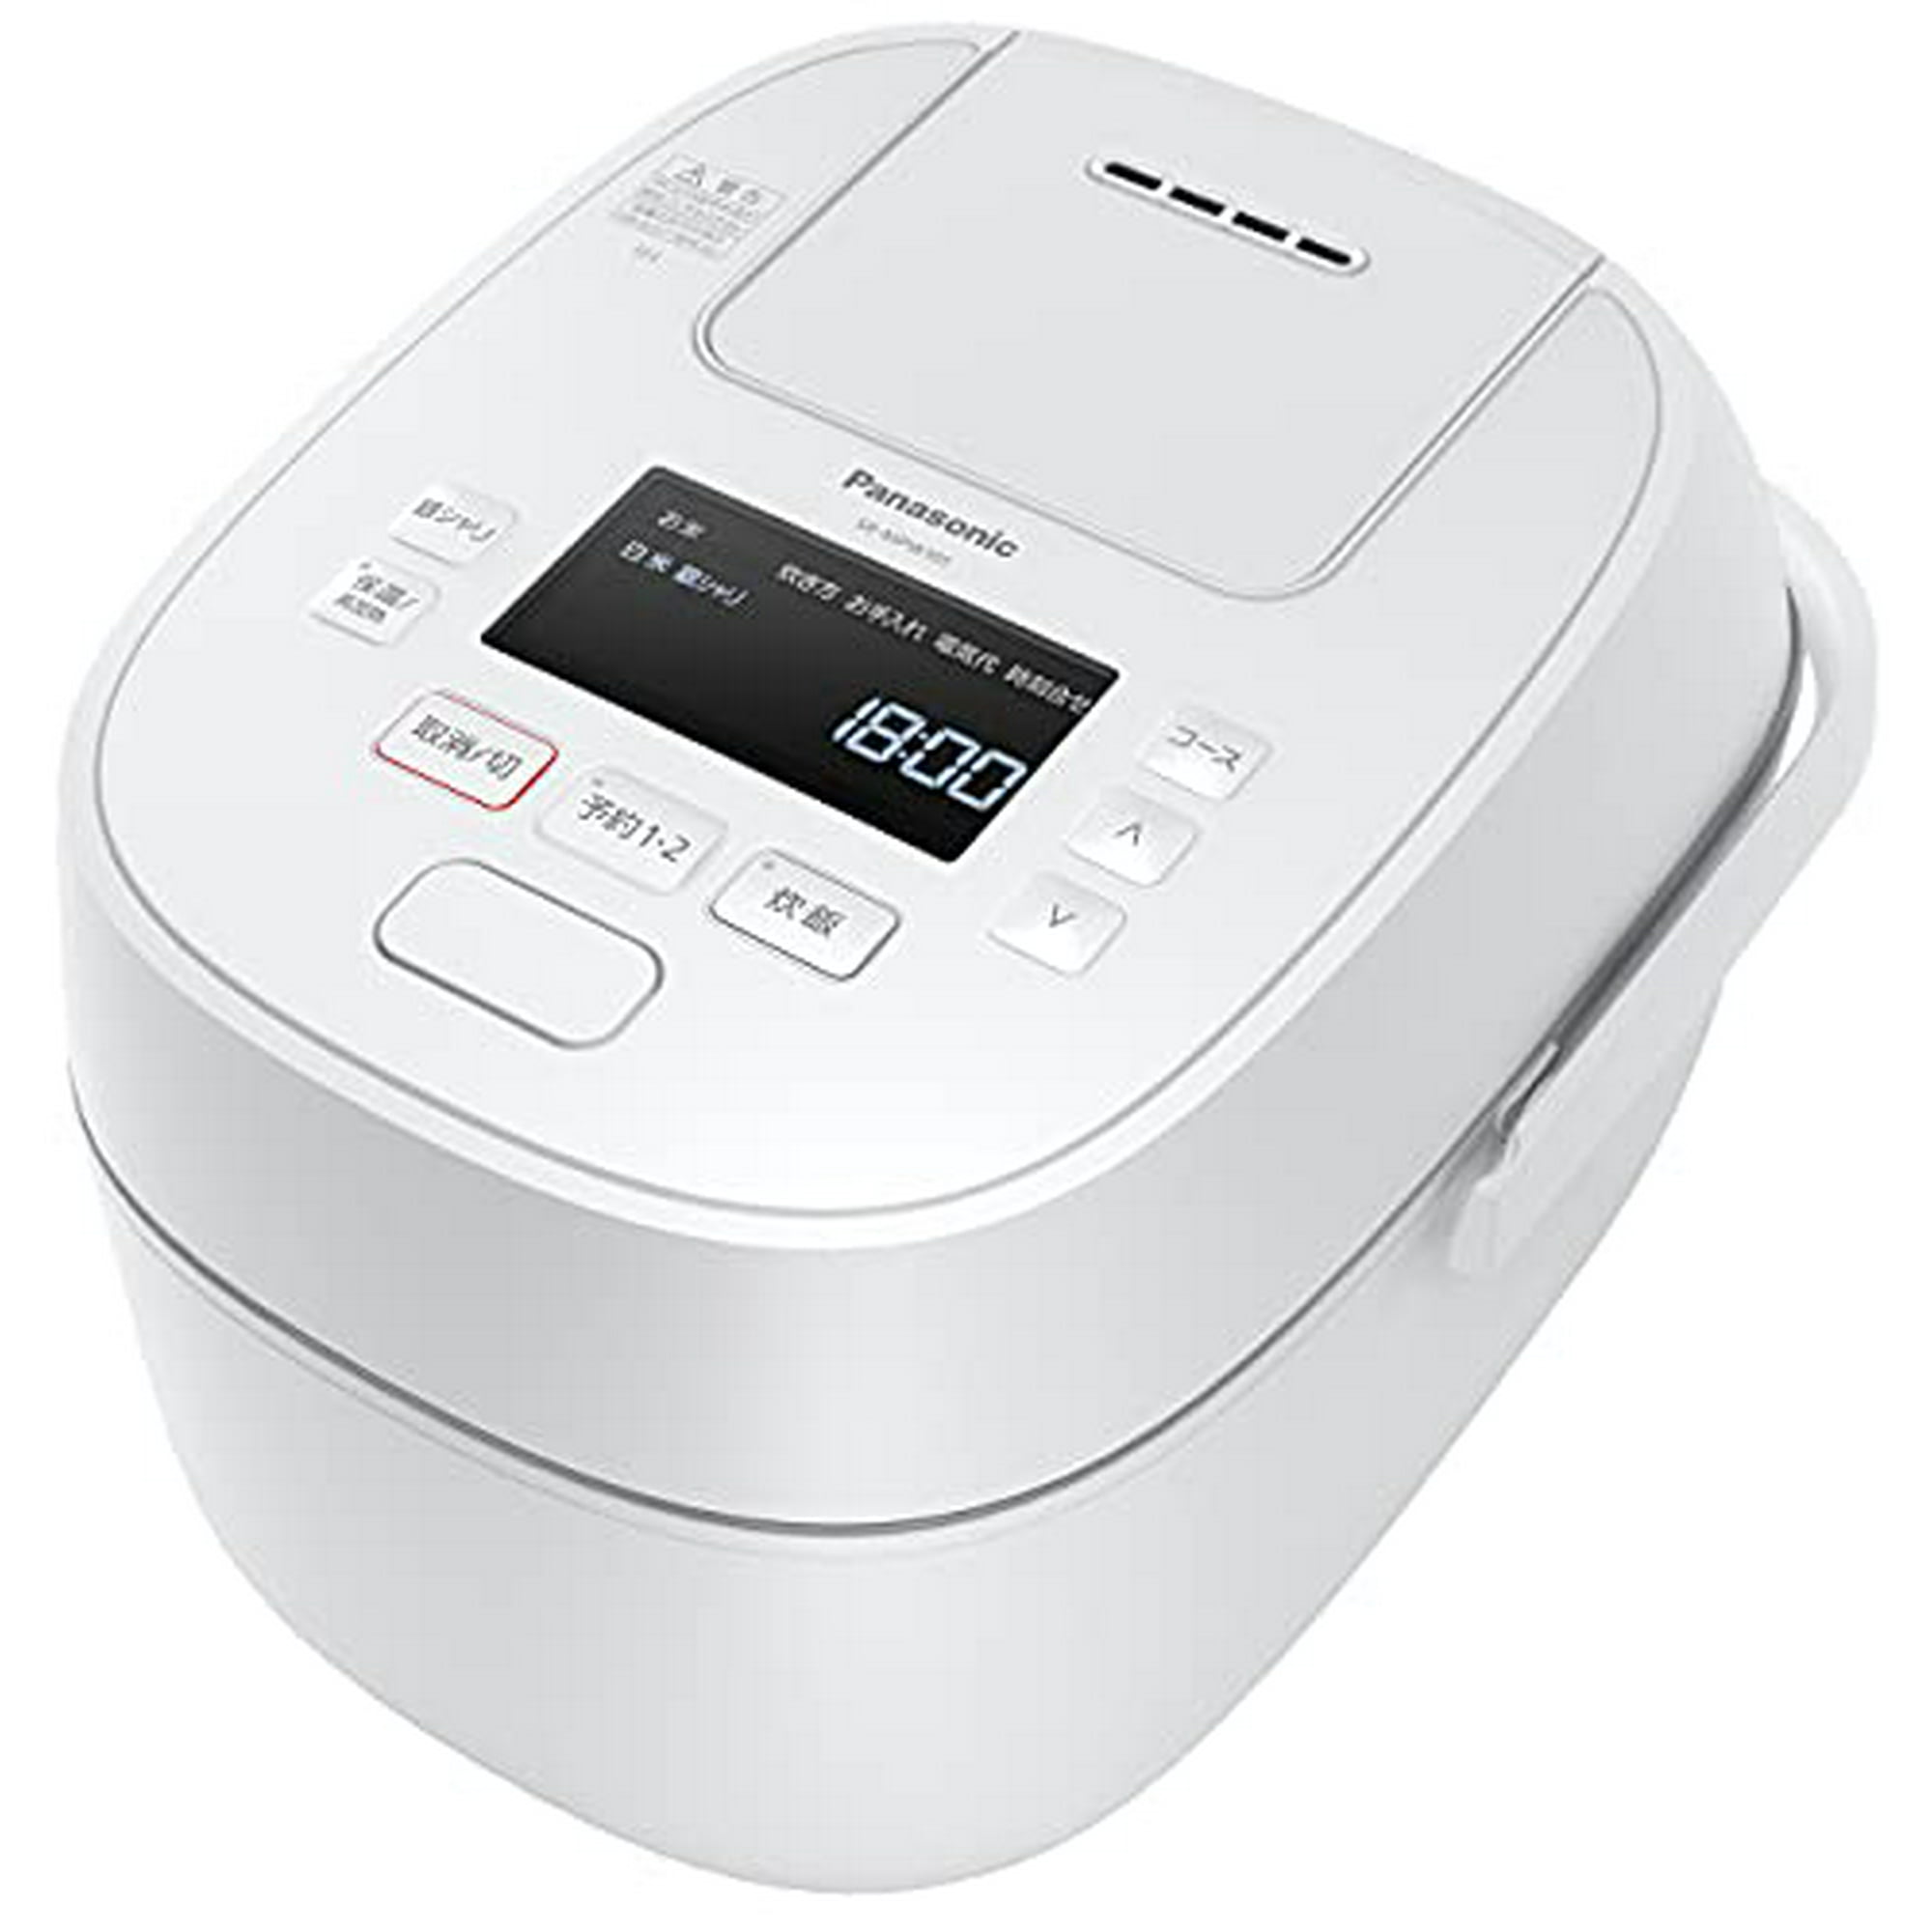 Panasonic Rice Cooker 5.5 Go Variable Pressure & Large Thermal